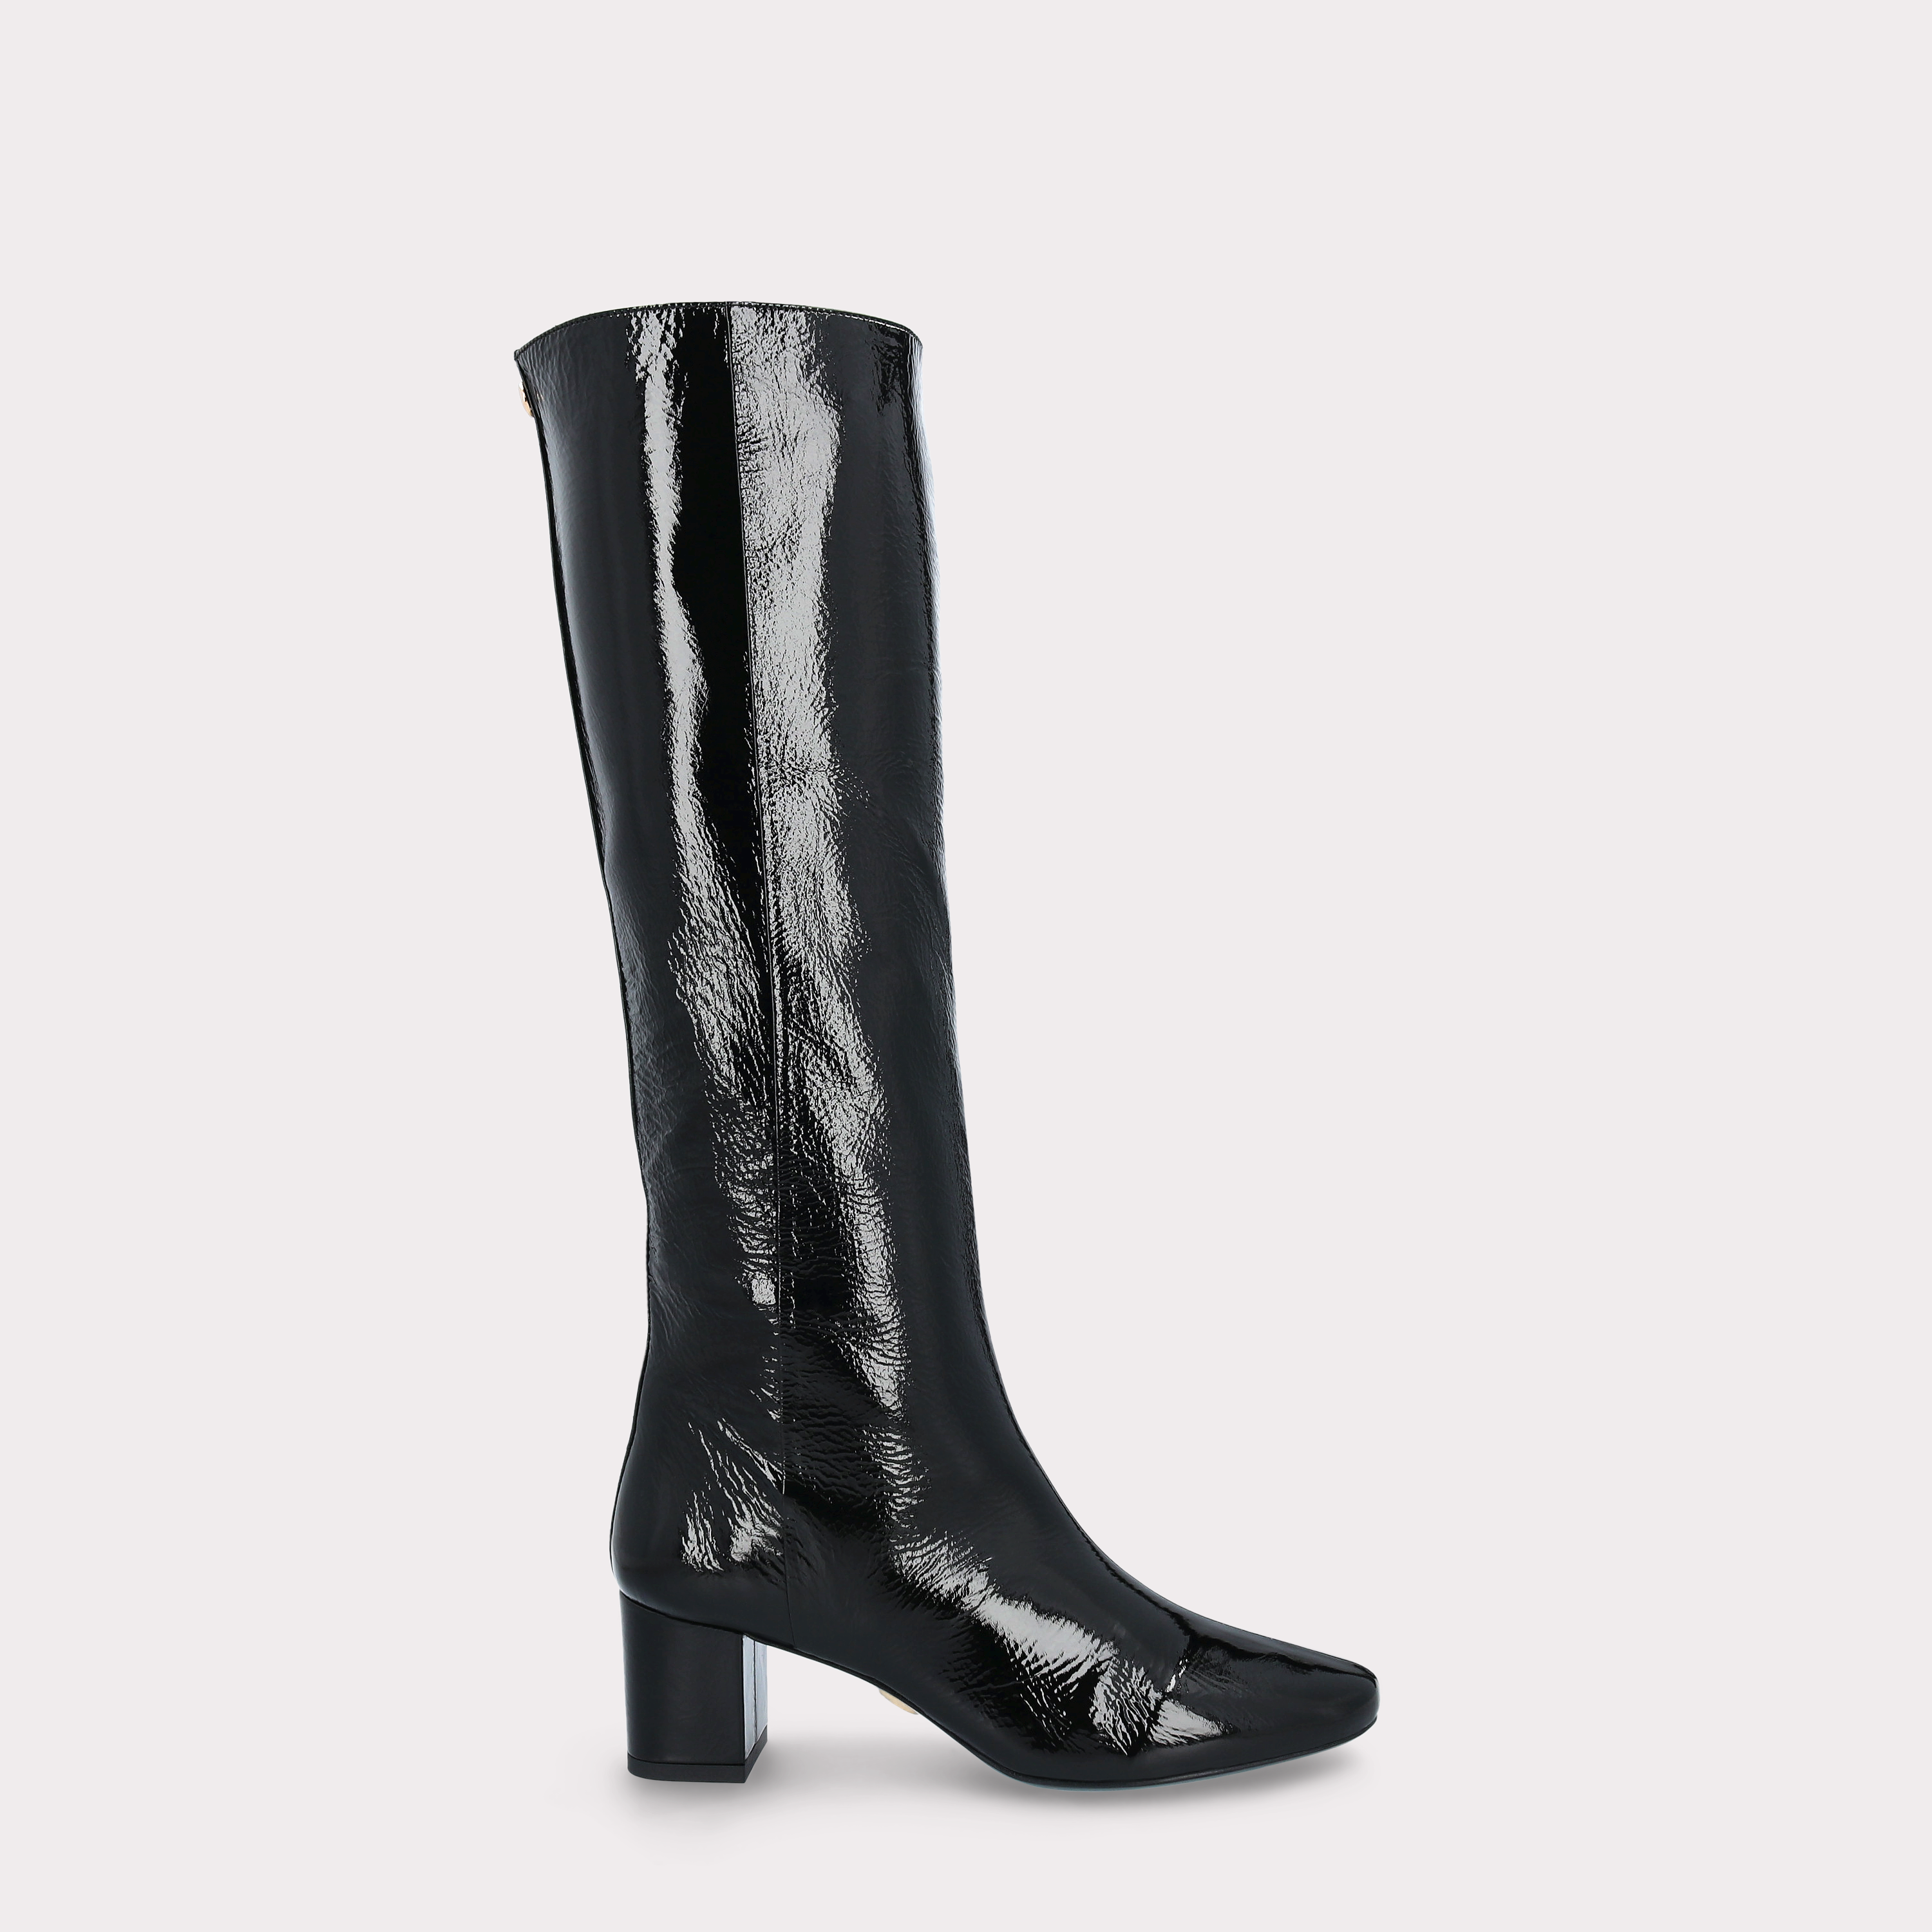 DEBBY TUBO BLACK CRUSHED PATENT LEATHER BOOTS